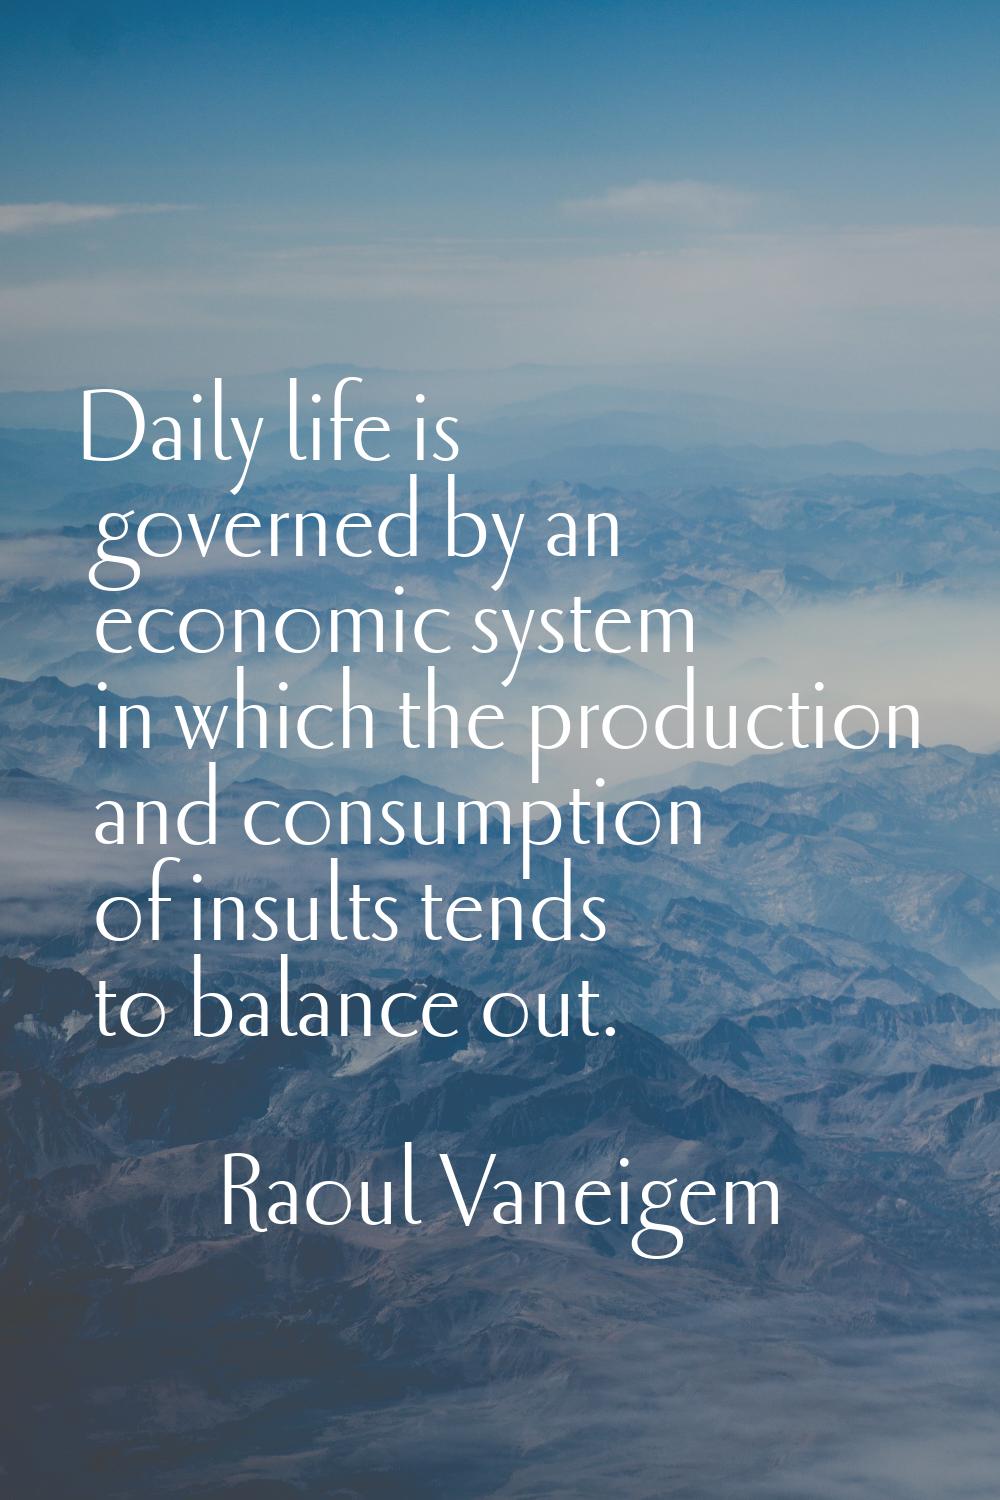 Daily life is governed by an economic system in which the production and consumption of insults ten